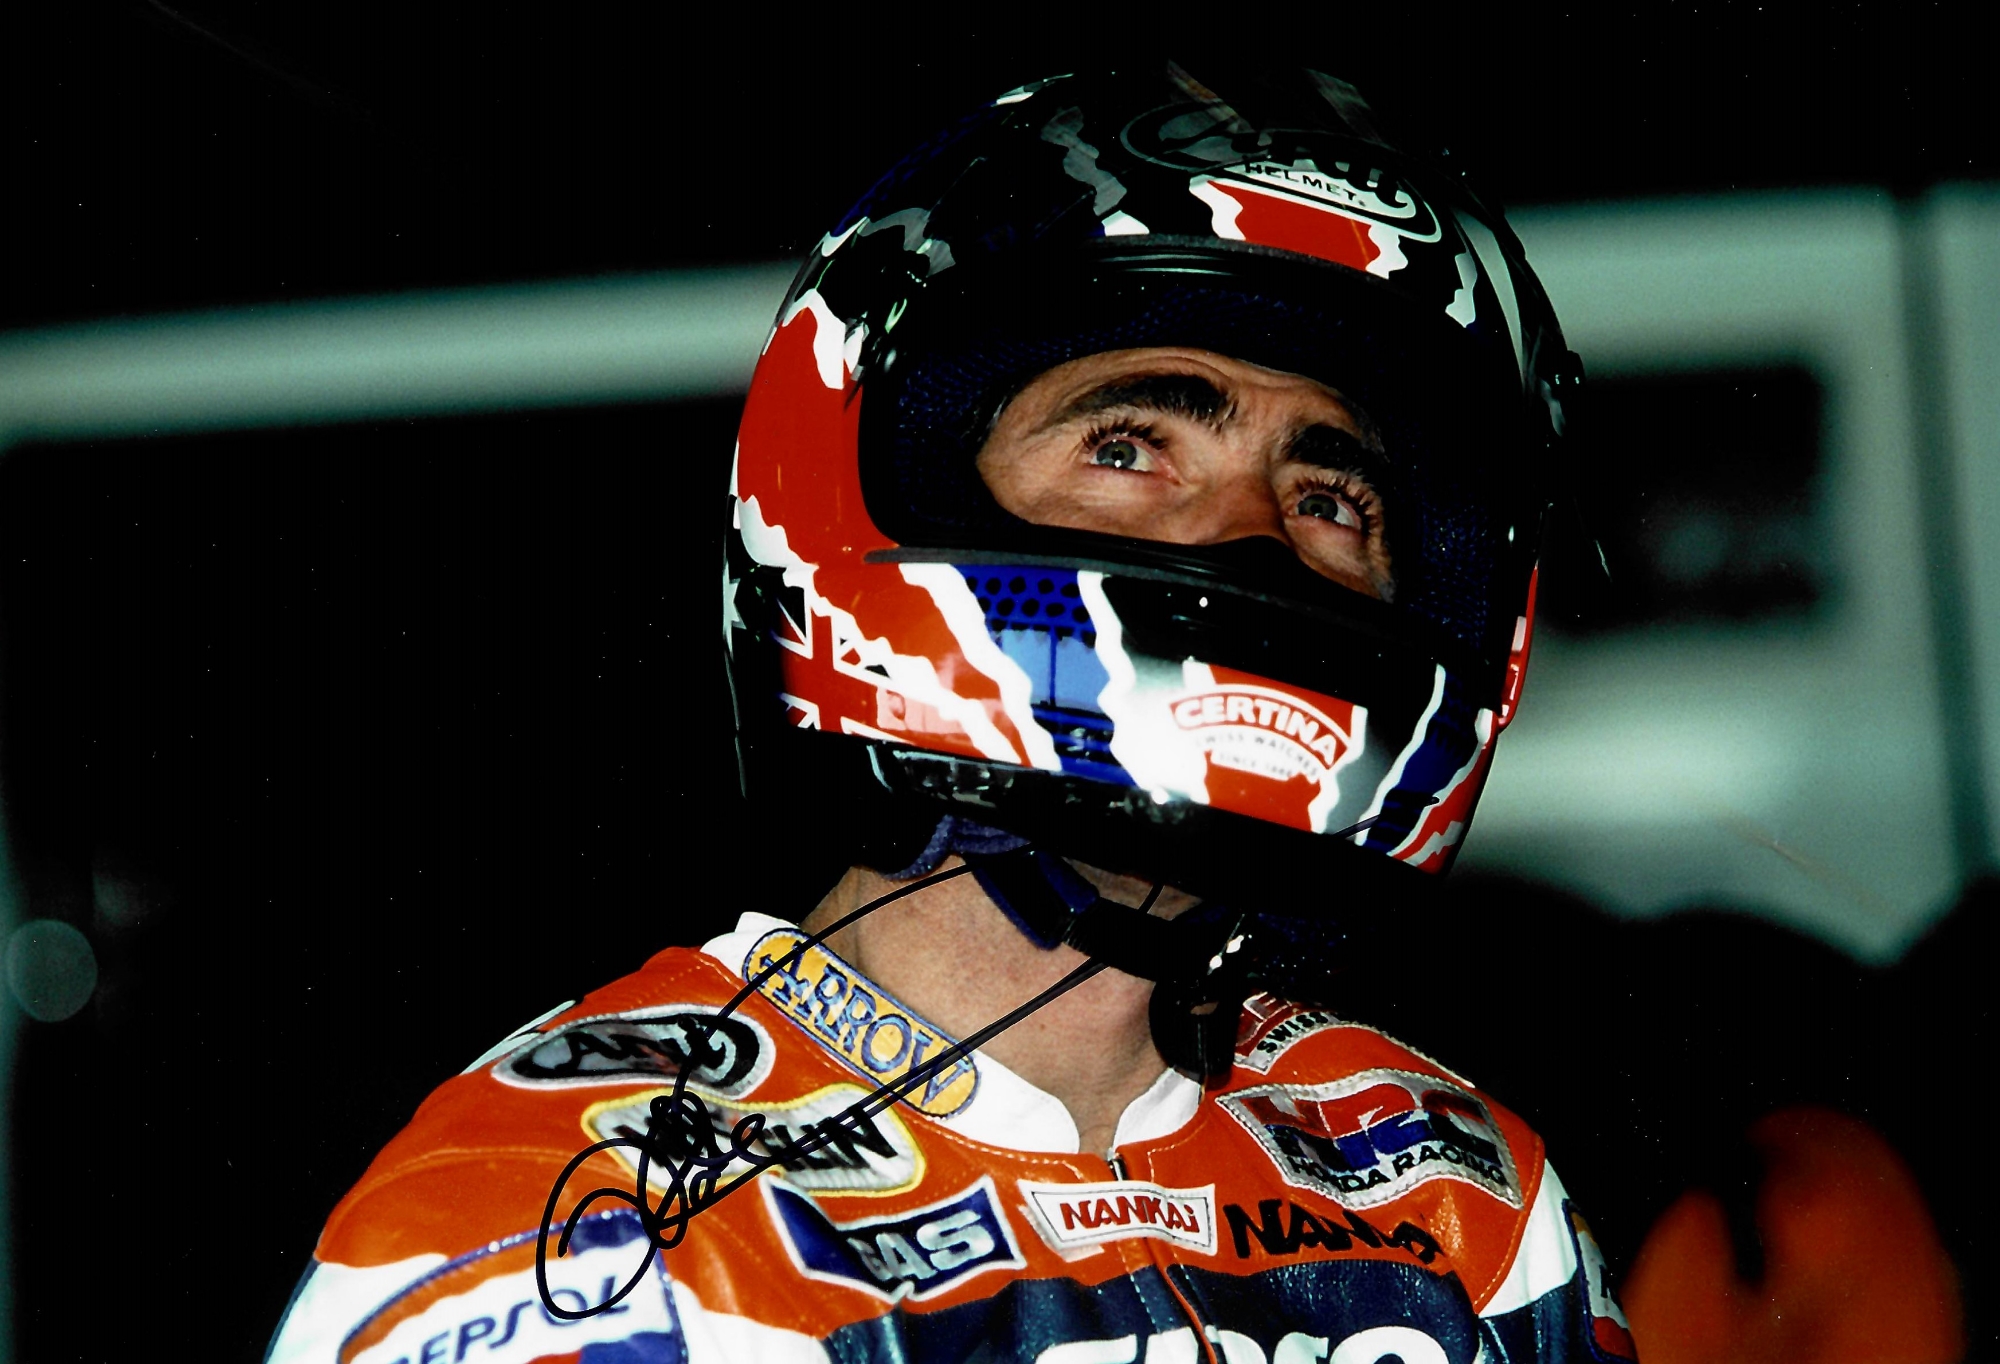 Collection of Moto GP Legends, seven signed 8 by 10in. photographs, including Mick Doohan, Wayne